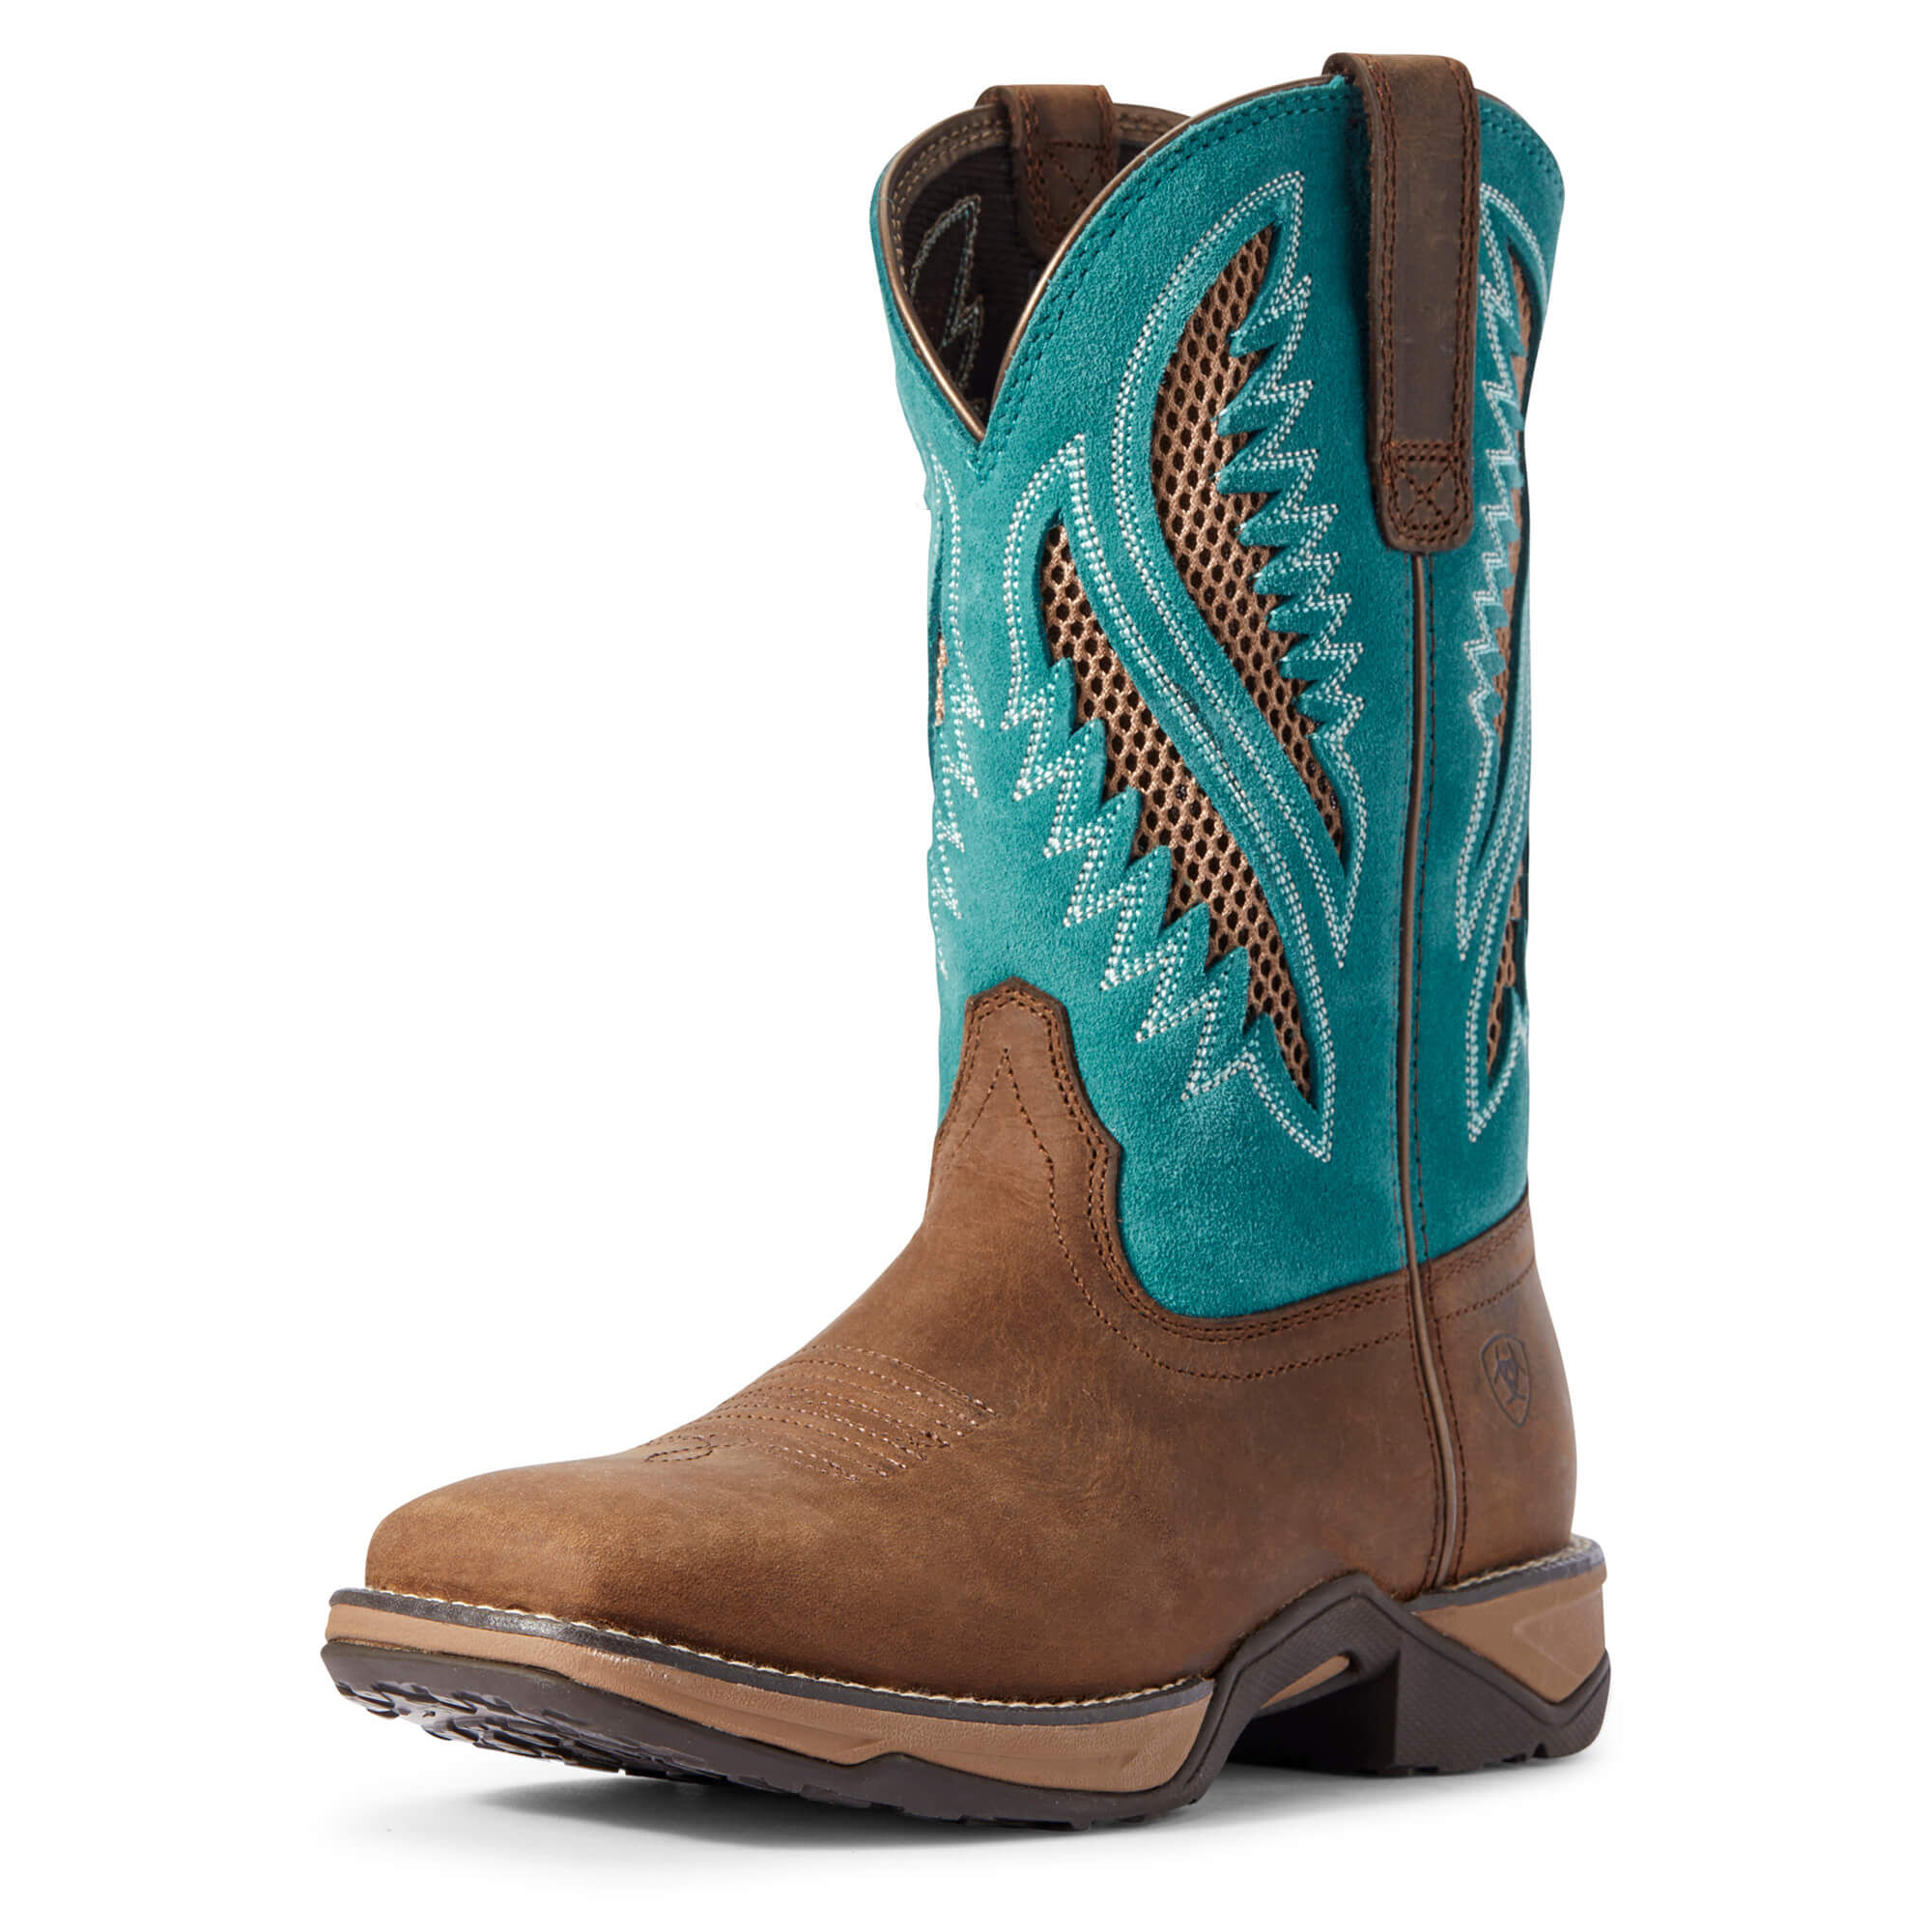 Women's Anthem VentTEK Western Boots in Chocolate Chip Leather  by Ariat